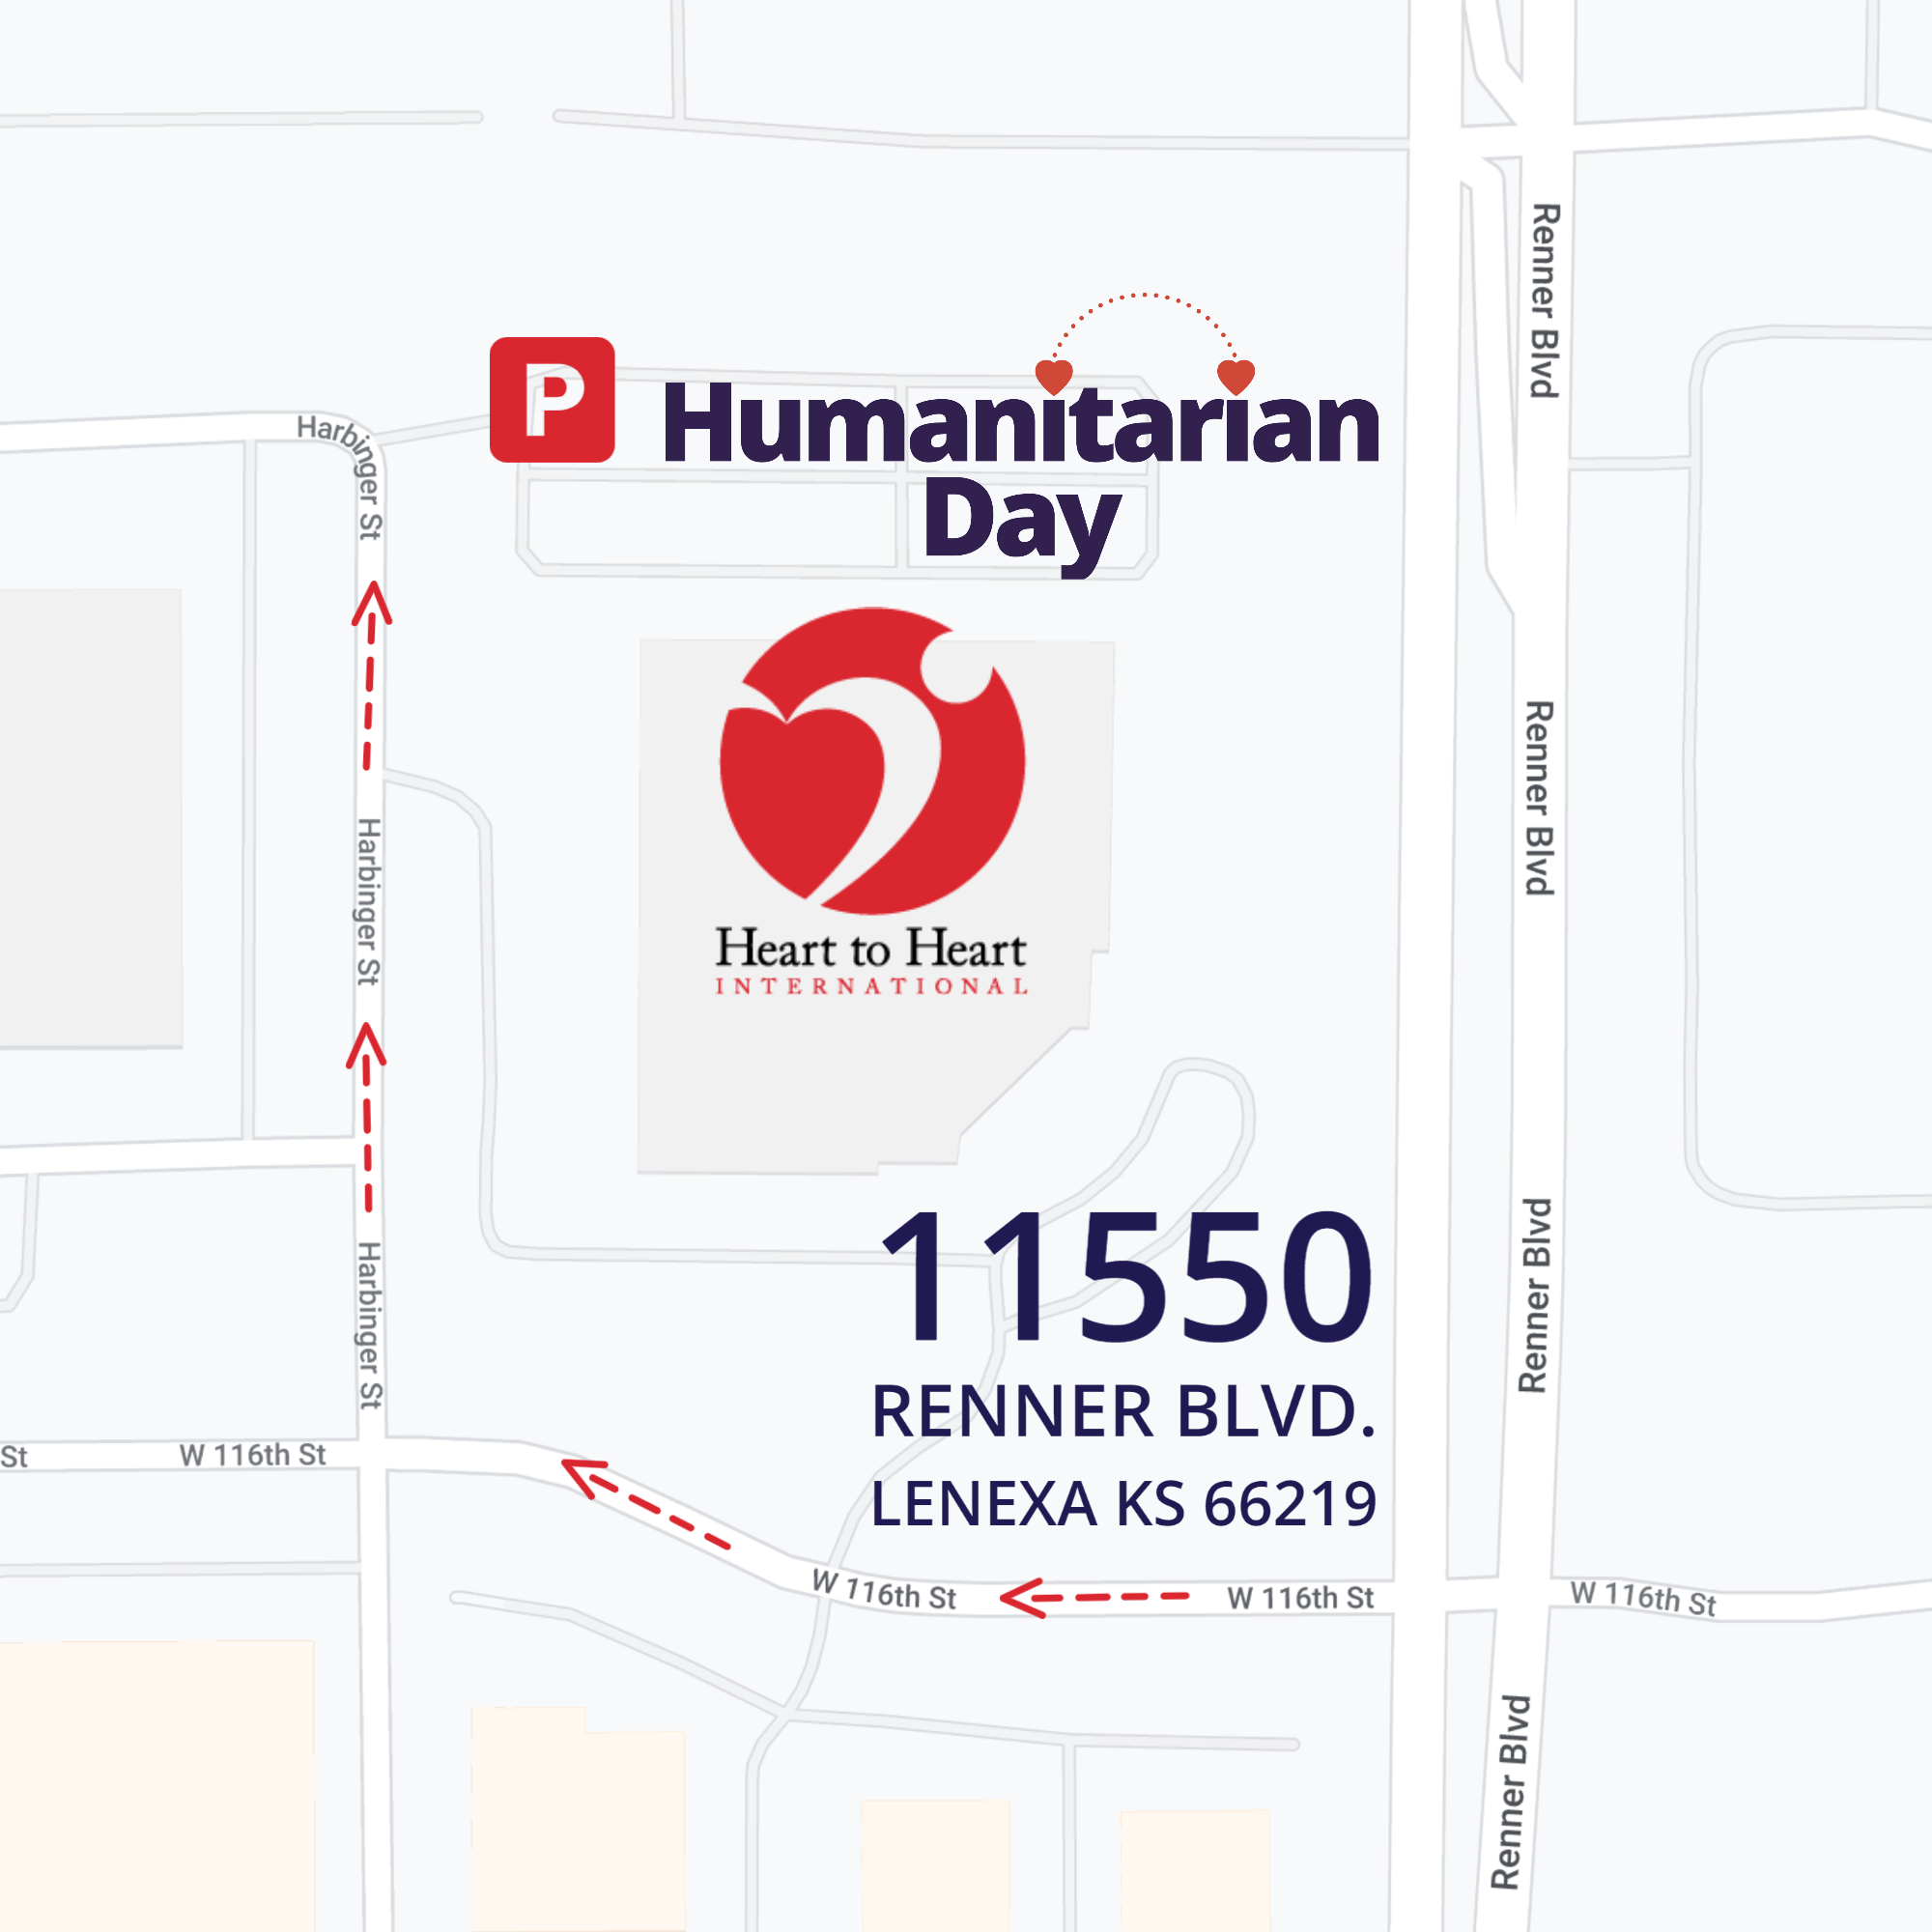 Humanitarian Day Event Map